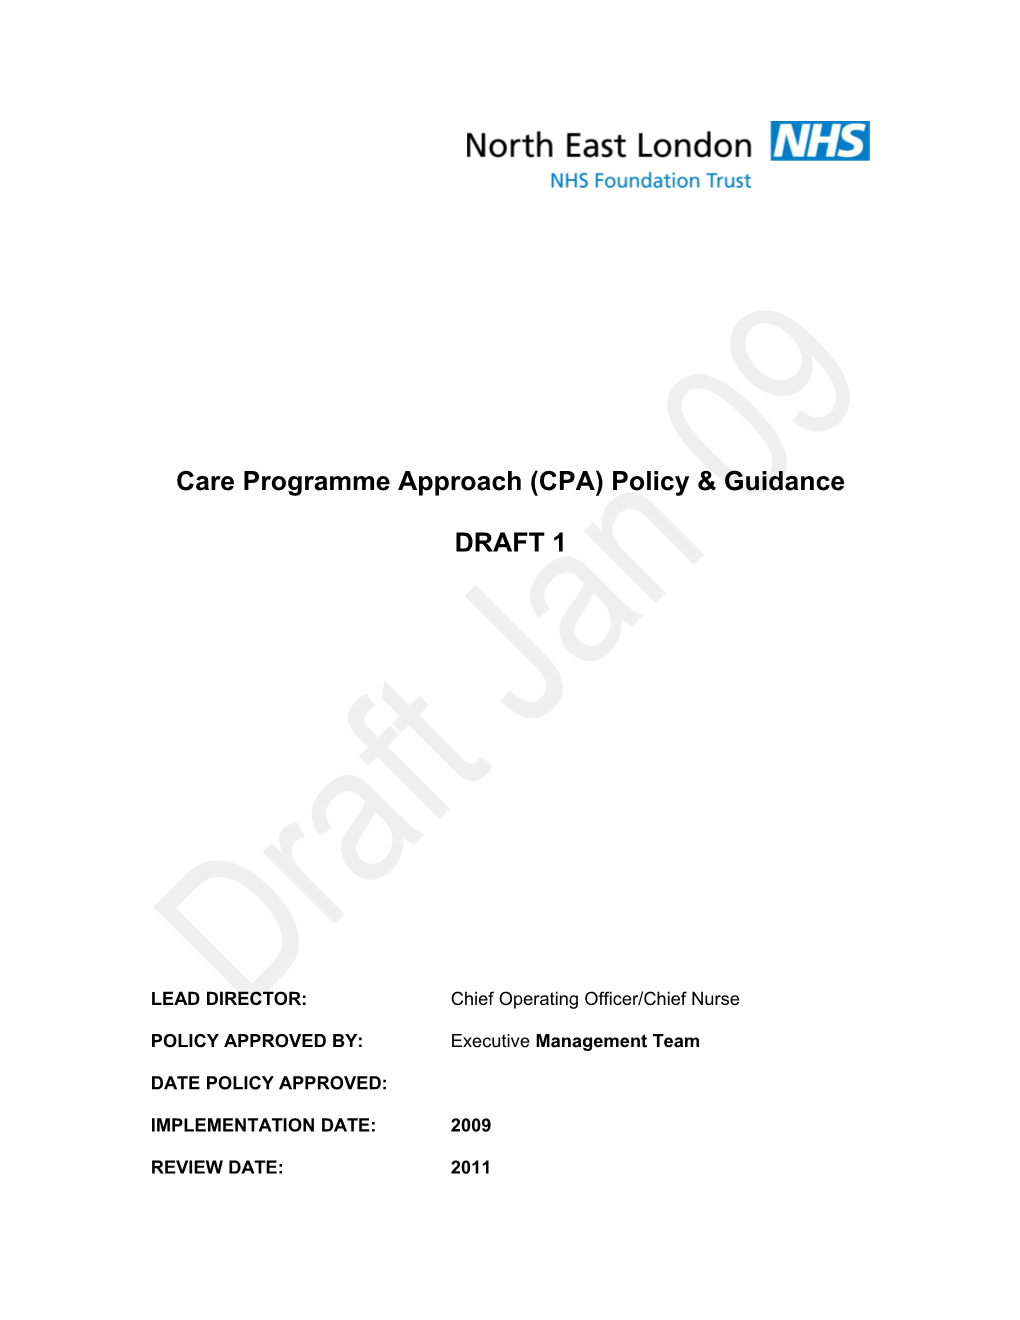 Care Programme Approach (CPA) Policy & Guidance